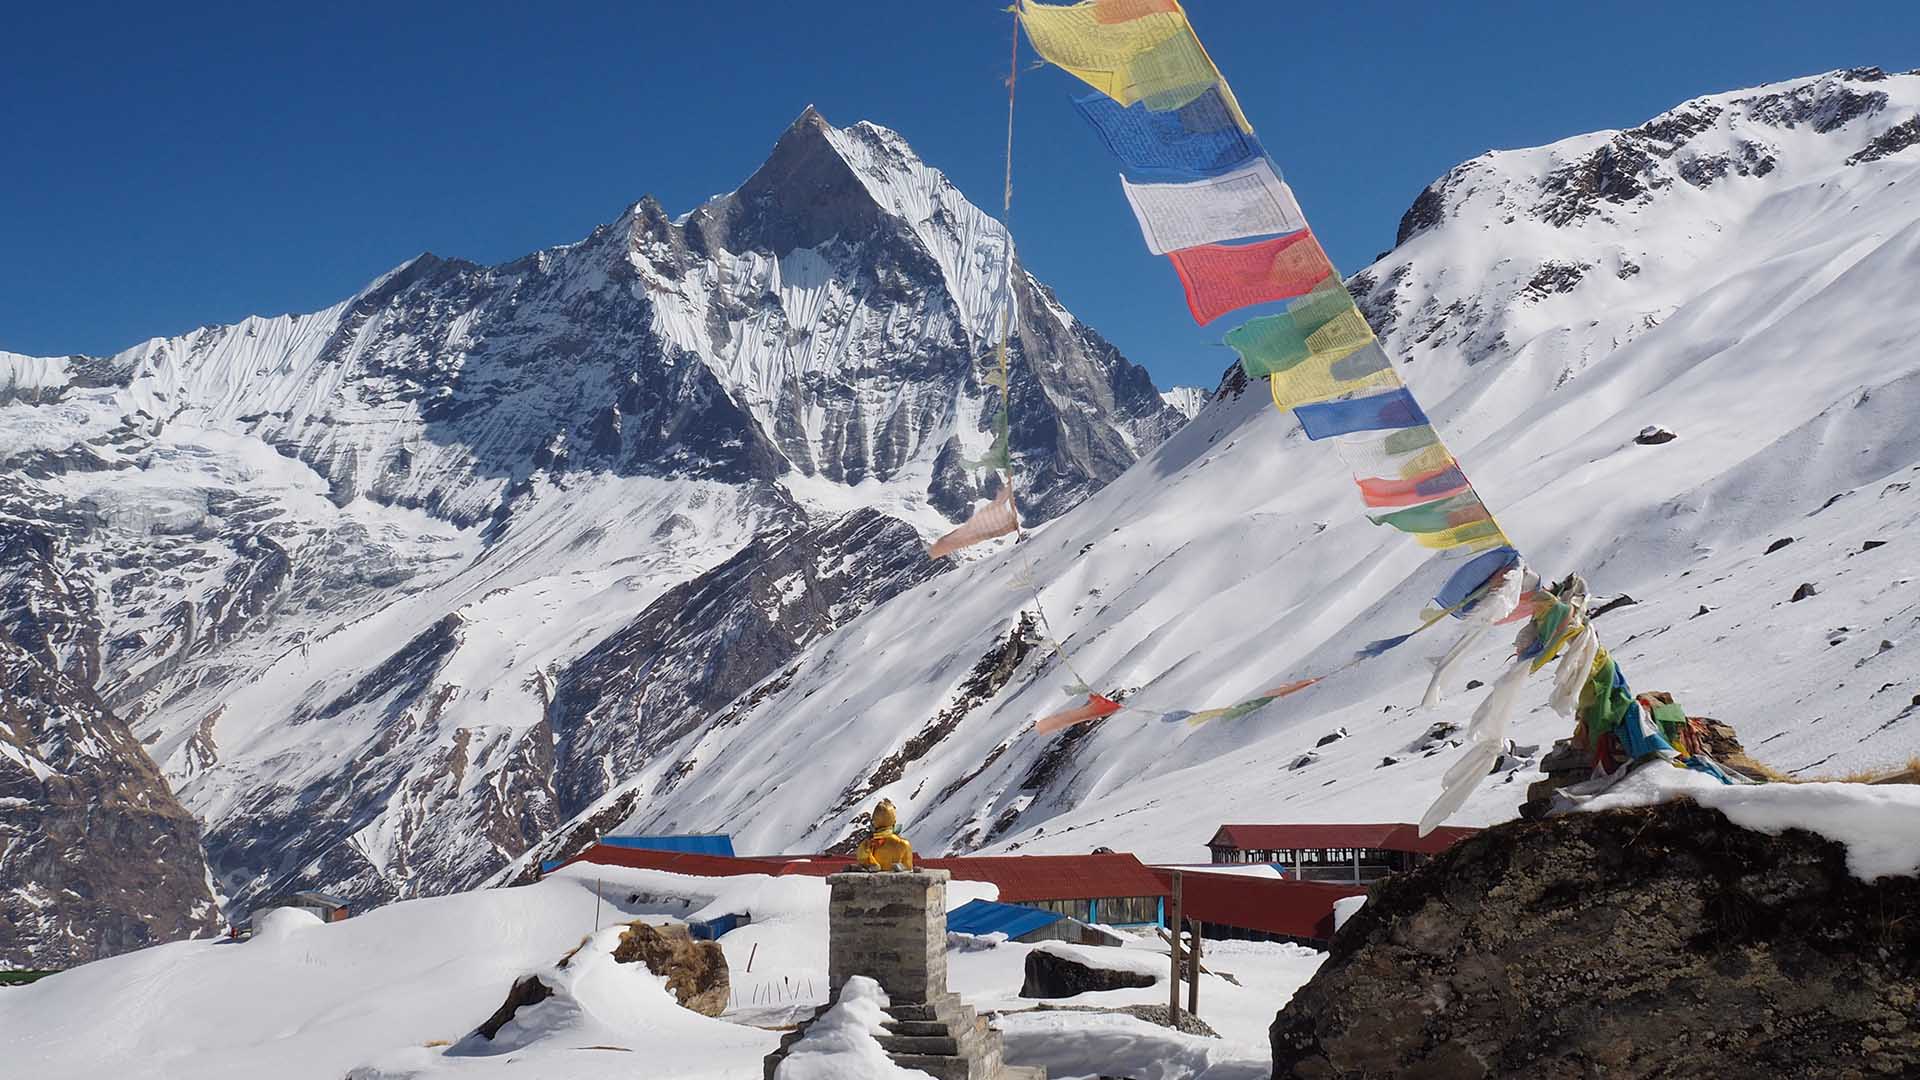 How Difficult Is The Trek To Annapurna Base Camp?